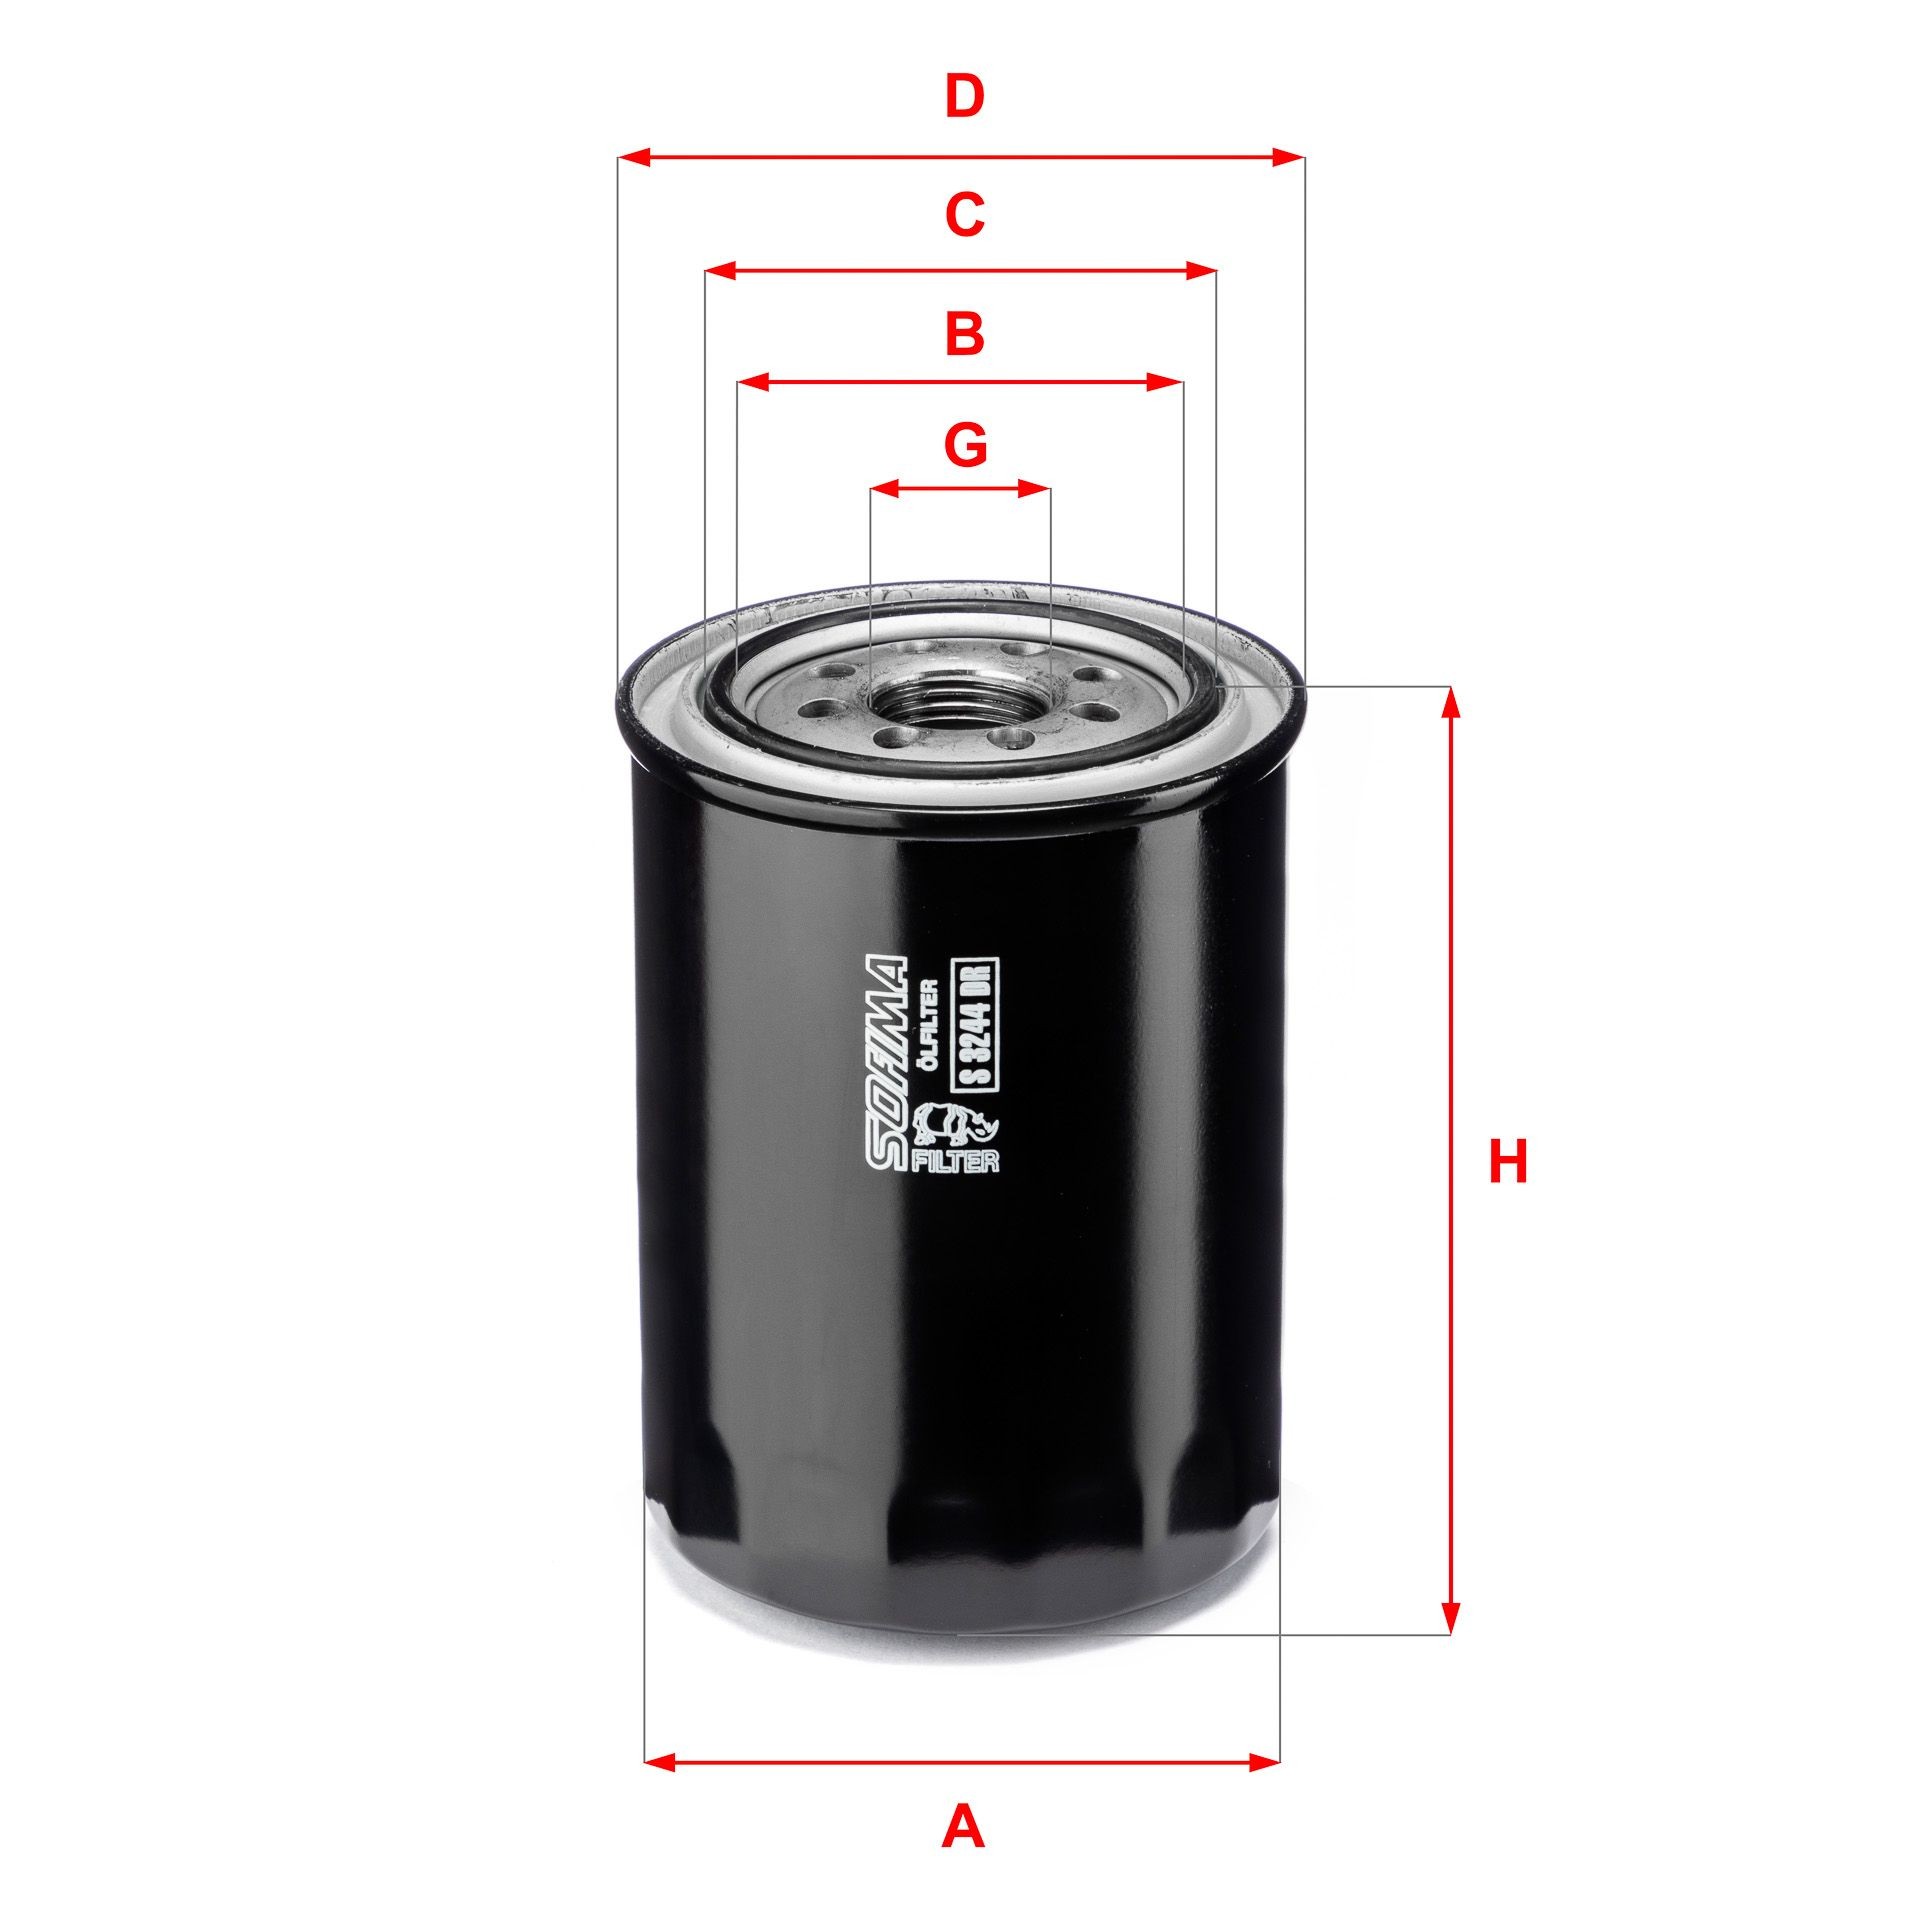 SOFIMA S 3244 DR Oil filter 1-12 UNF, with one anti-return valve, Spin-on Filter